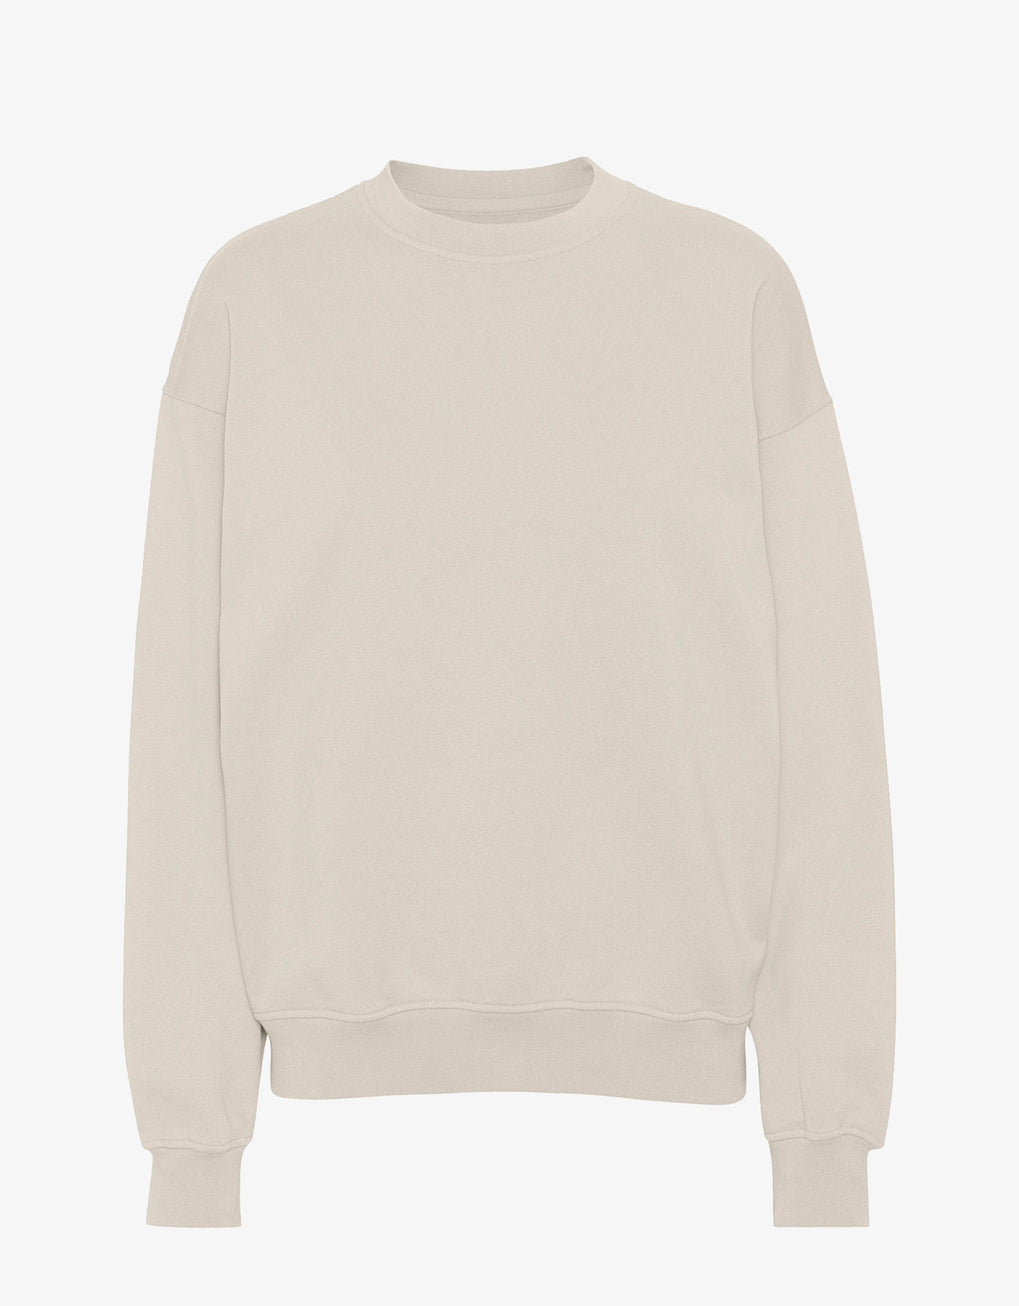 Organic oversized crew in ivory white by Colorful Standard